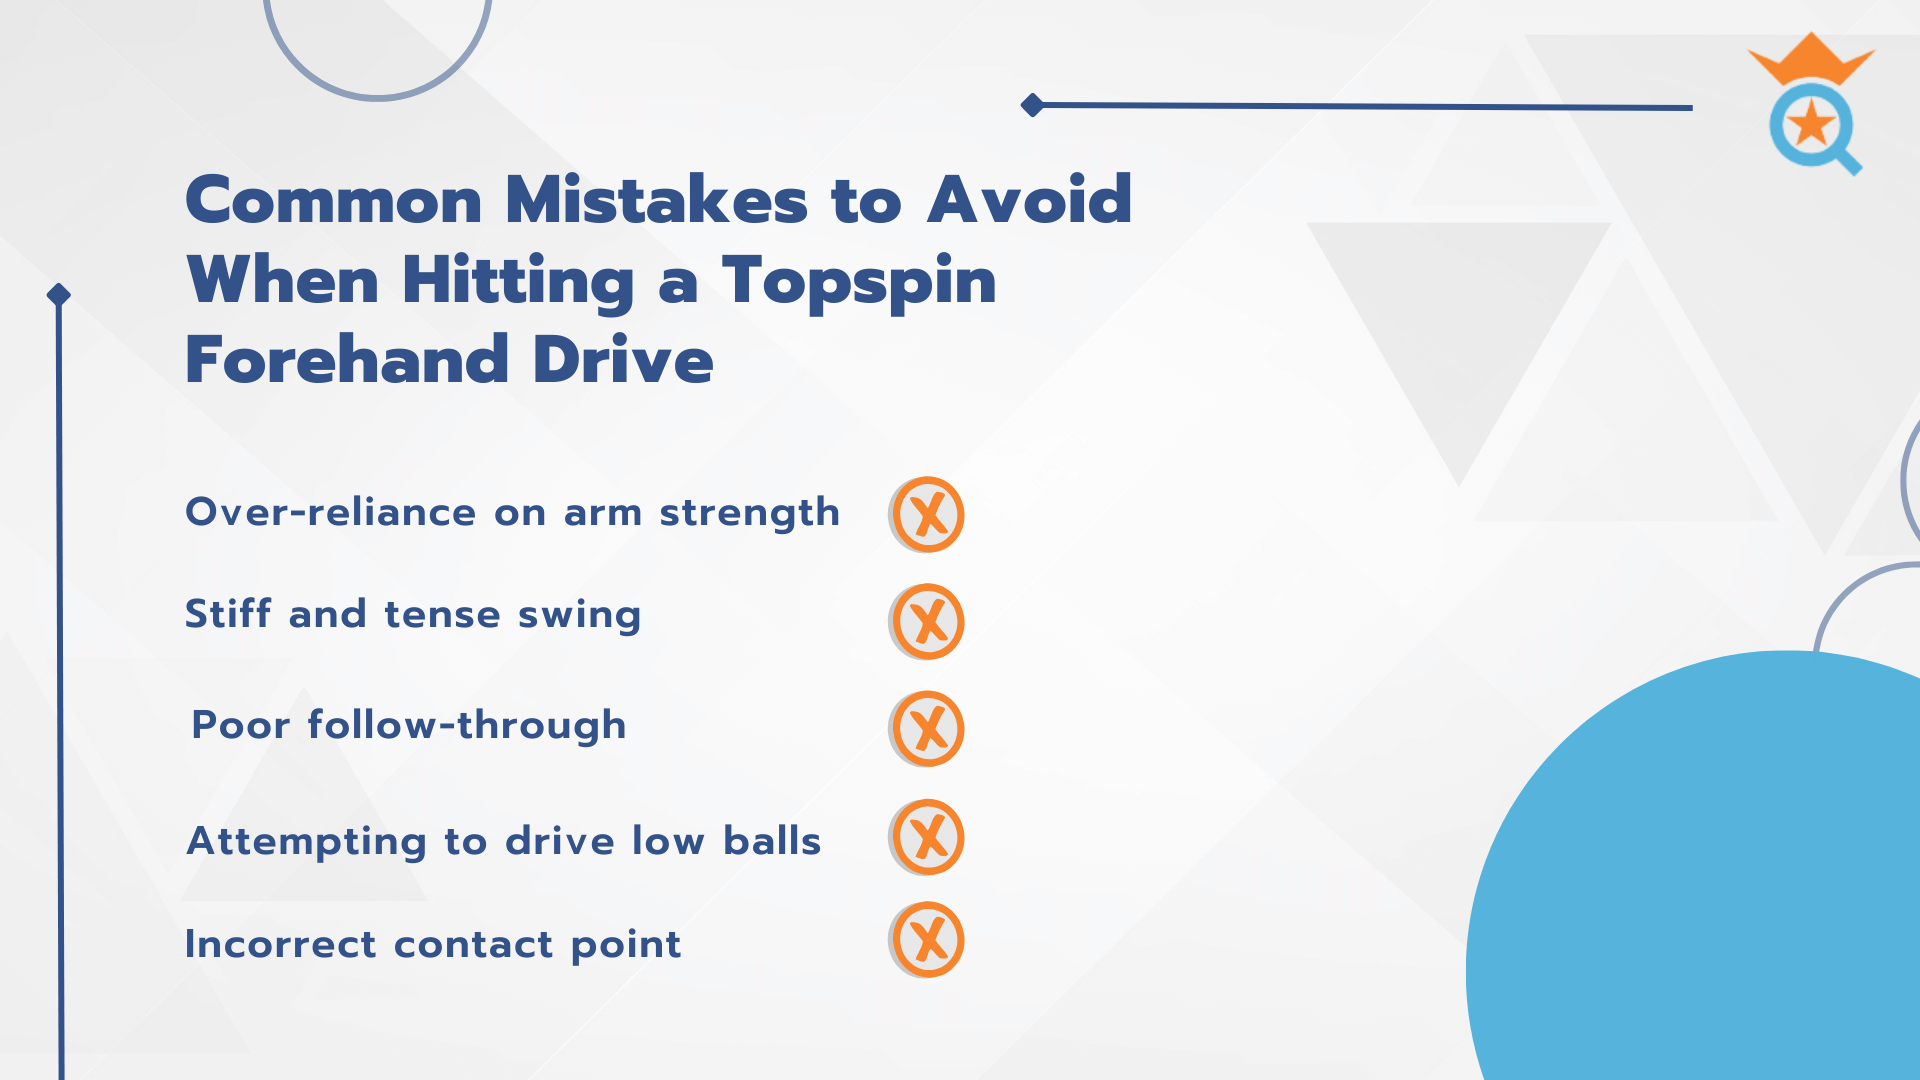 Common Mistakes to Avoid When Hitting a Topspin Forehand Drive